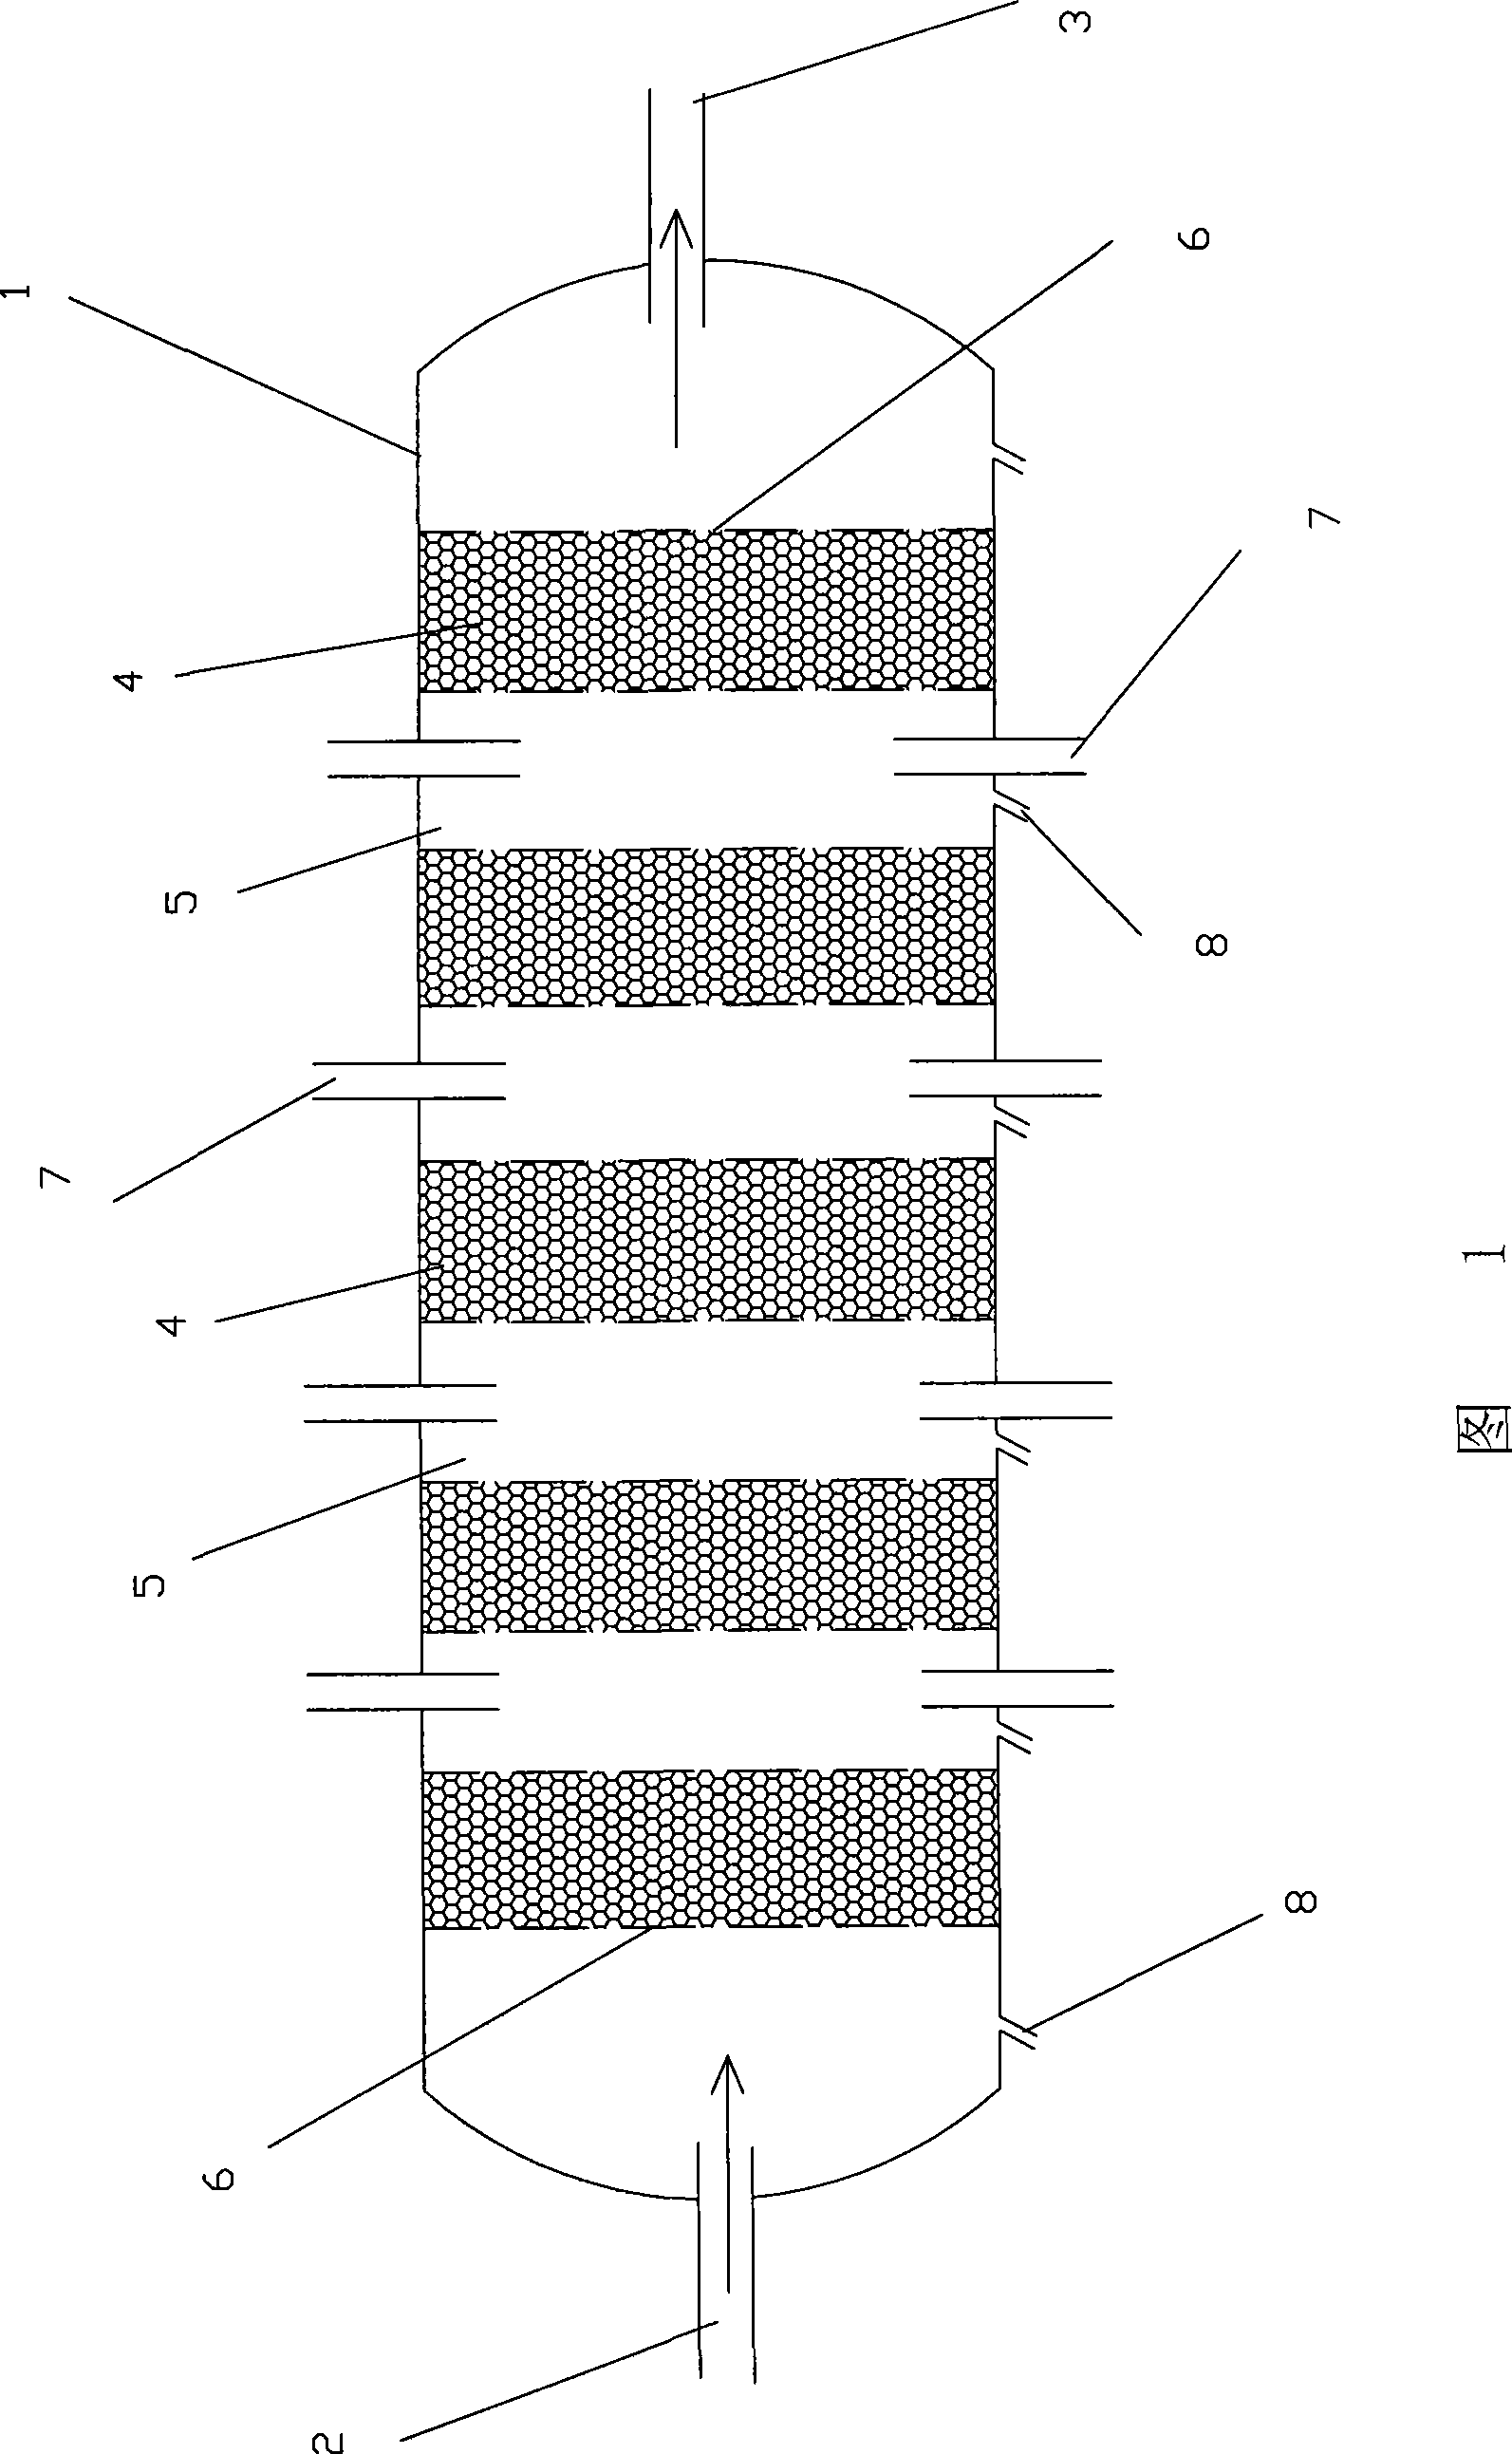 Horizontal type fixed bed reactor for producing propene with oxygen-containing compound as raw material